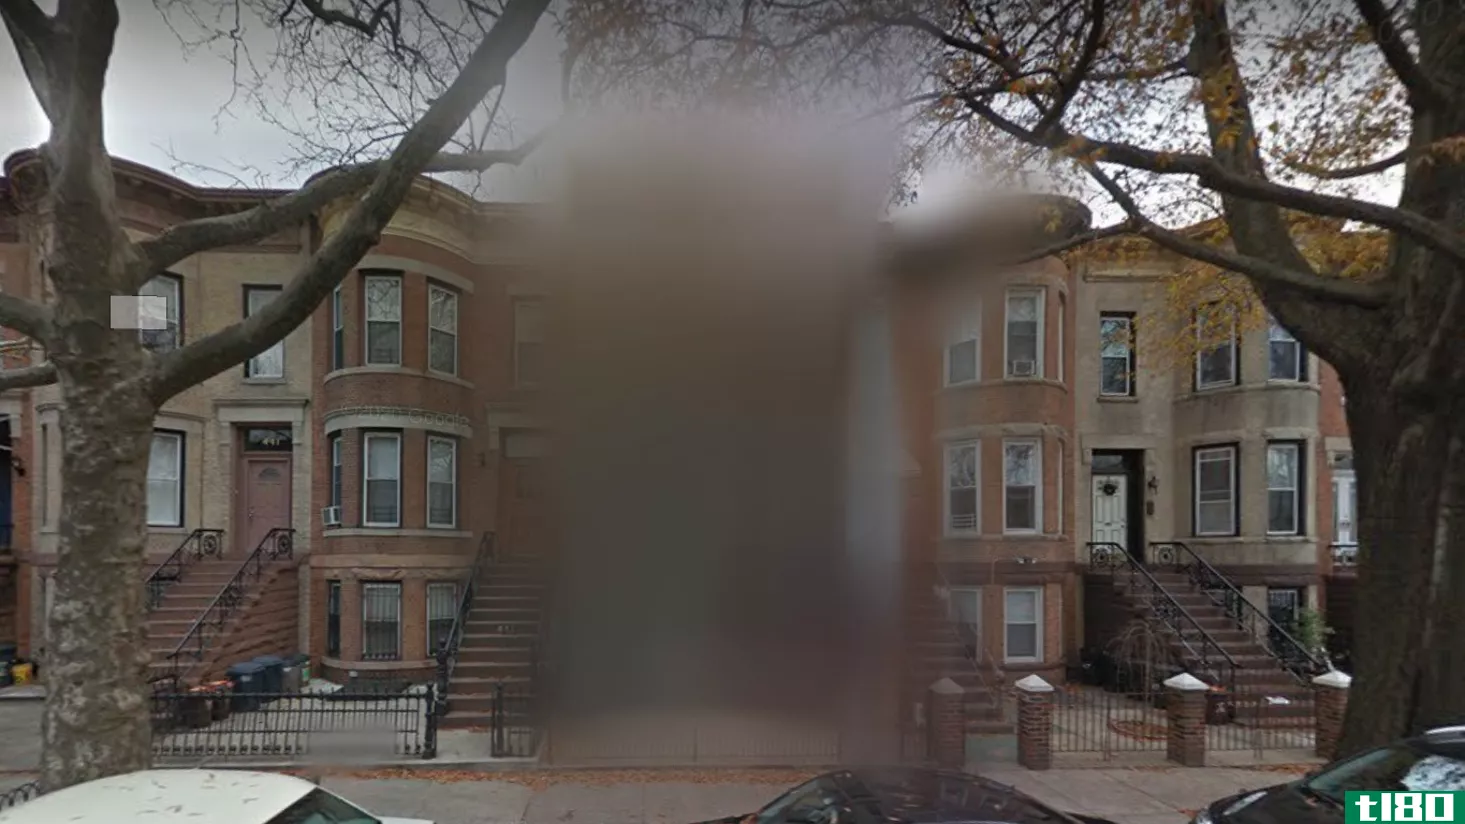 A screenshot of Street View in Google Maps with a house blurred from view